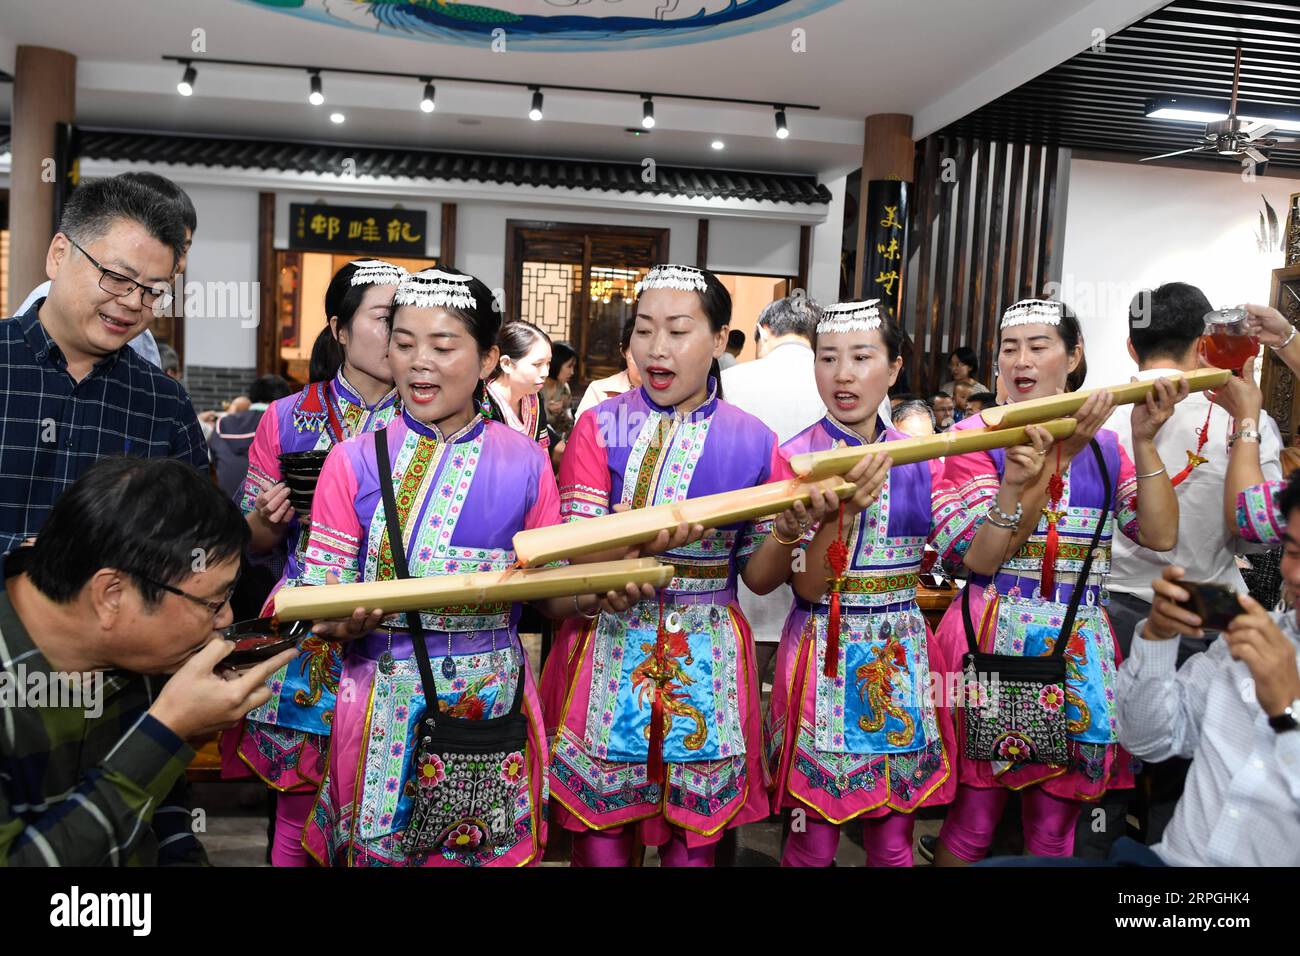 191016 -- HANGZHOU, Oct. 16, 2019 -- Local villagers in traditional costumes of the She ethnic group greet visitors at the long-table banquet held at Longfeng ethnic village in Eshan Township of the She ethnic group of Tonglu County, east China s Zhejiang Province, Oct. 16, 2019. More than 90 tables of delicacies were presented at the long-table banquet, attracting local villagers as well as tourists to enjoy the food of the She ethnic group.  CHINA-ZHEJIANG-ESHAN-LONG-TABLE BANQUET CN HuangxZongzhi PUBLICATIONxNOTxINxCHN Stock Photo